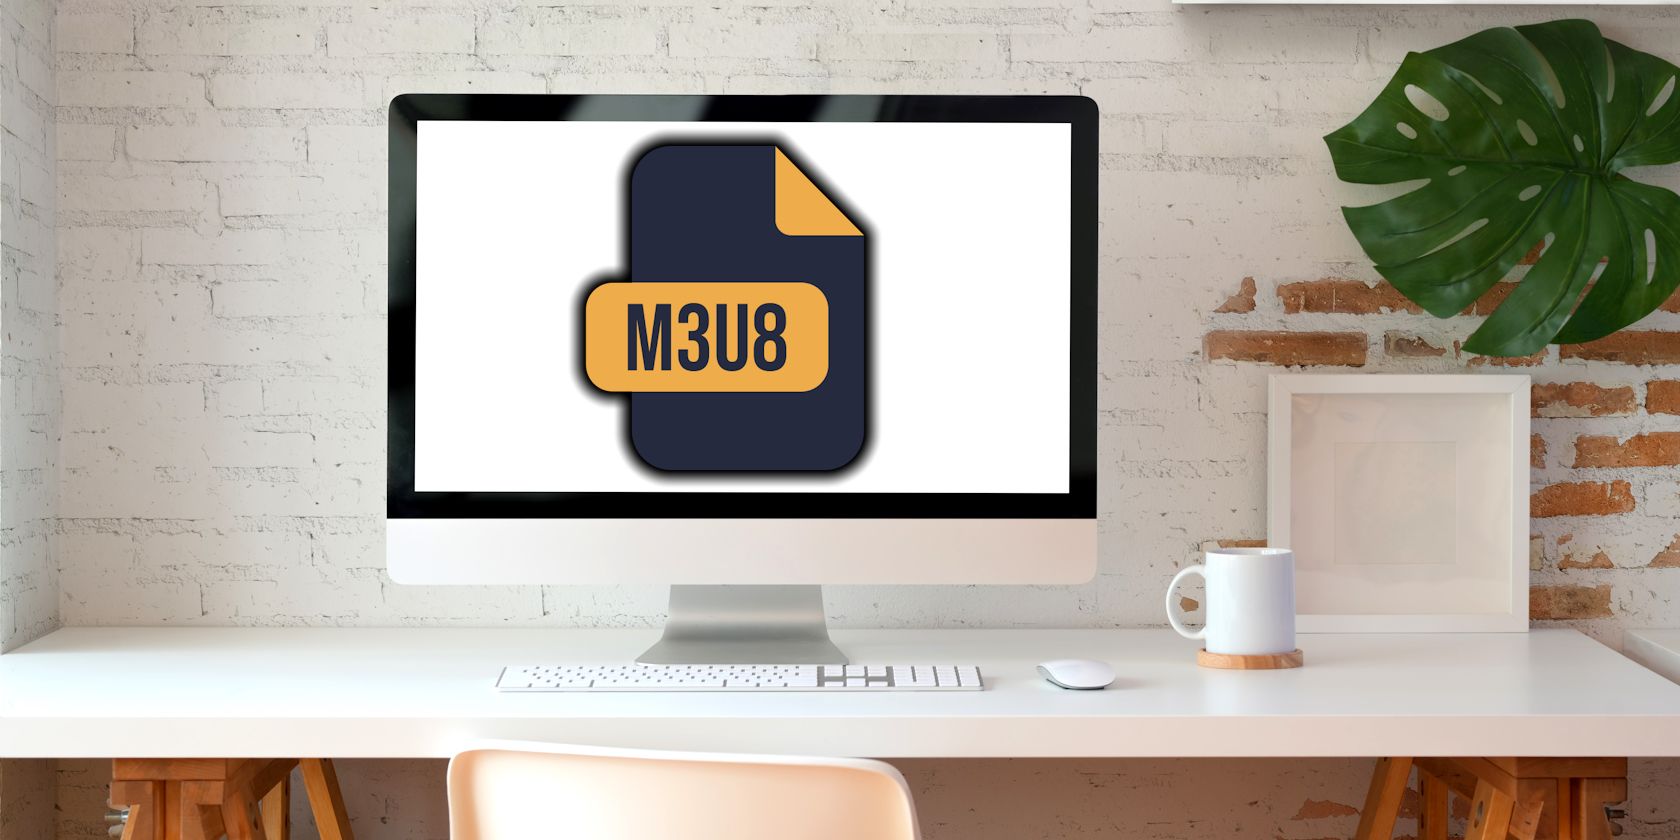 m3u8 file icon on pc monitor in office